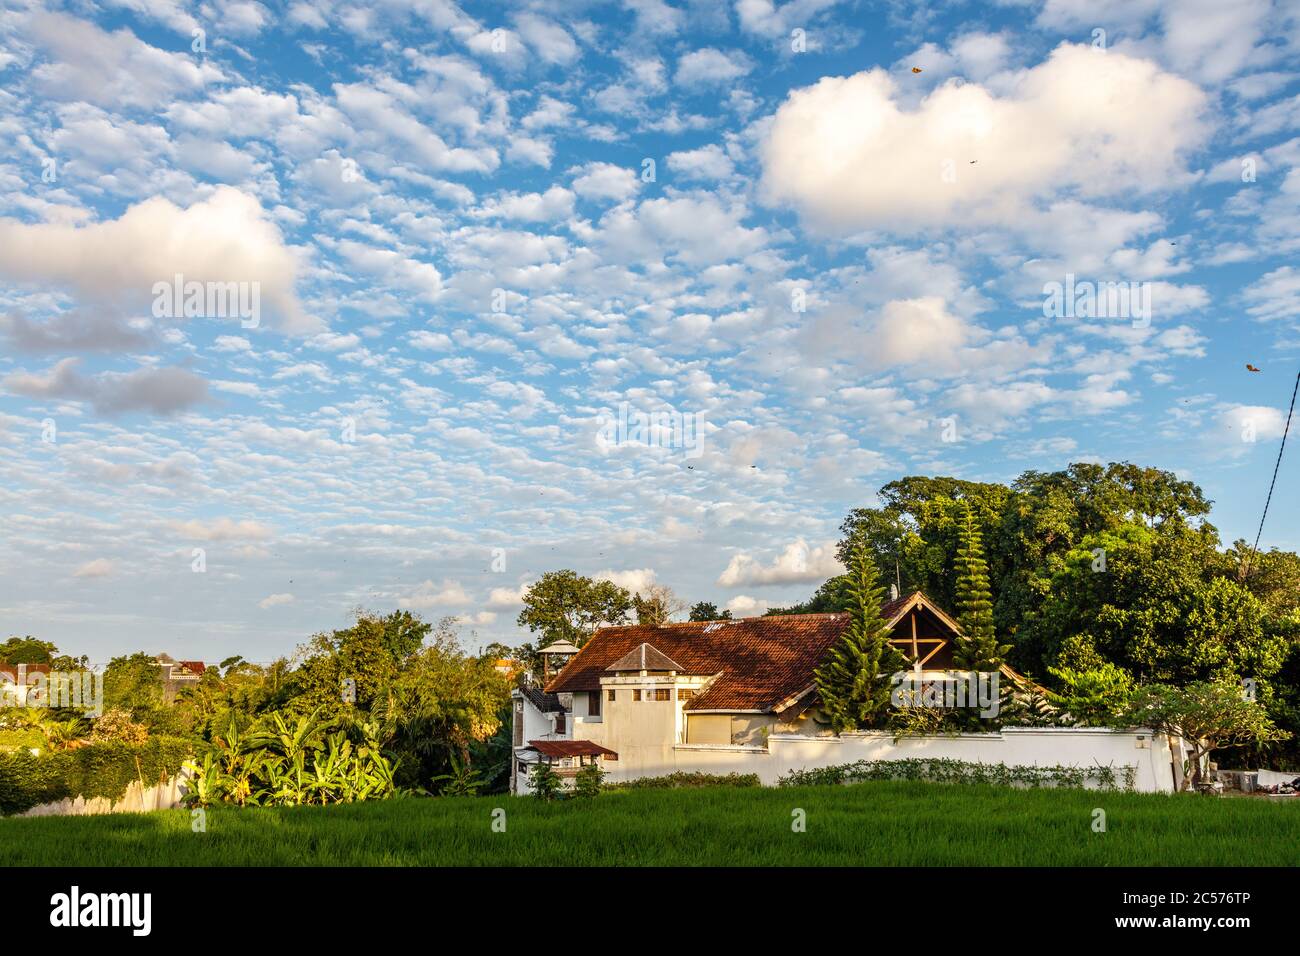 Blue sky with many little white clouds over the roofs of a village. Badung, Bali, Indonesia, Stock Photo